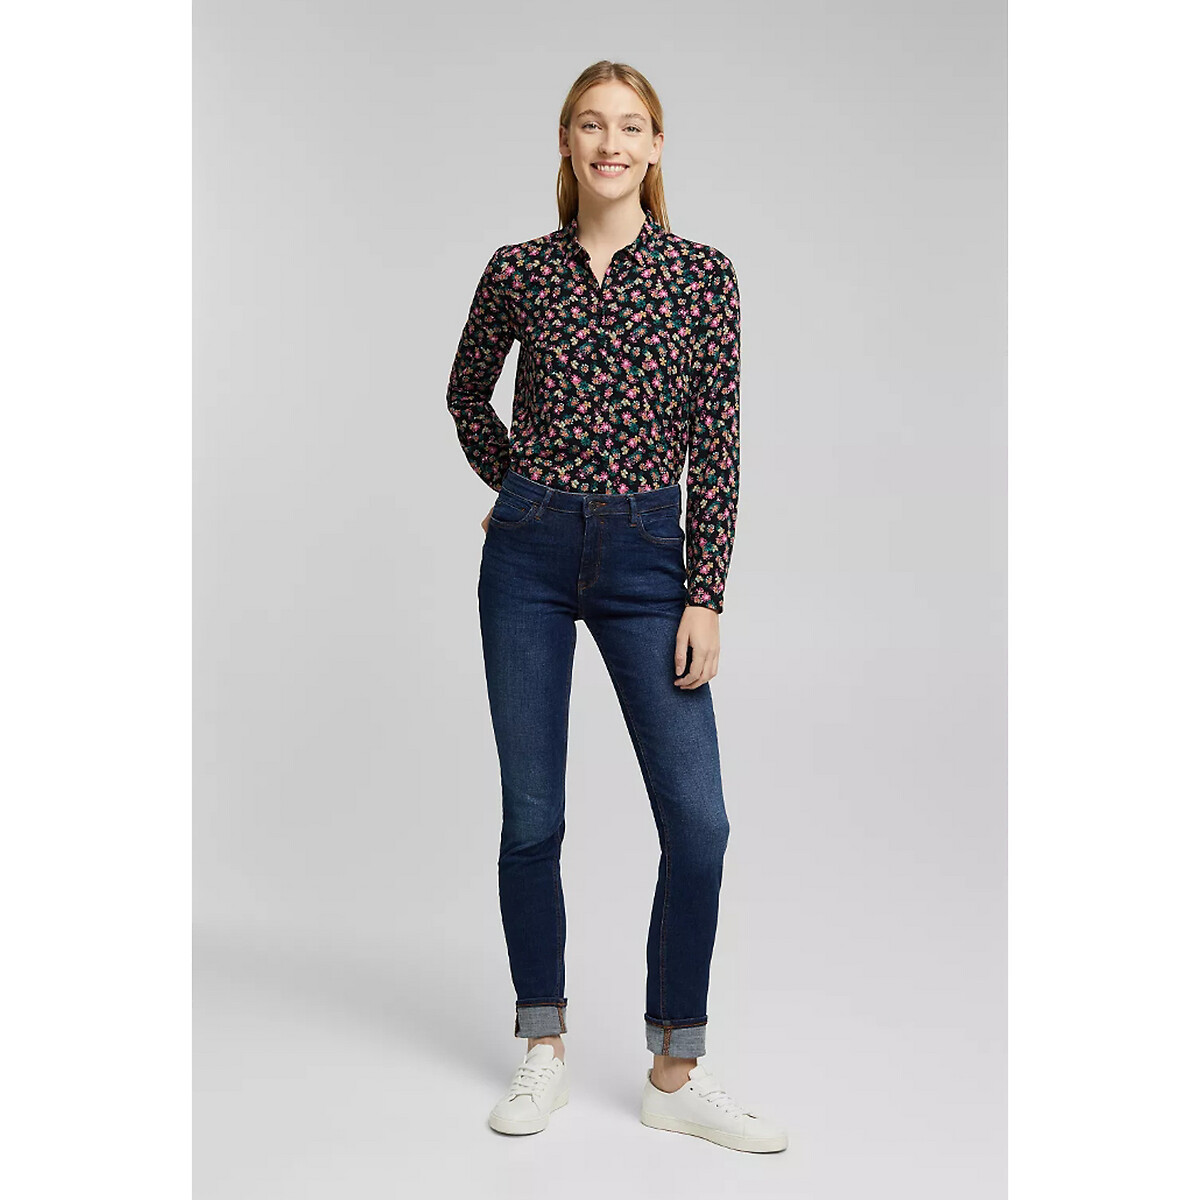 Mid-Rise Slim Jeans in Organic Cotton, Length 32"